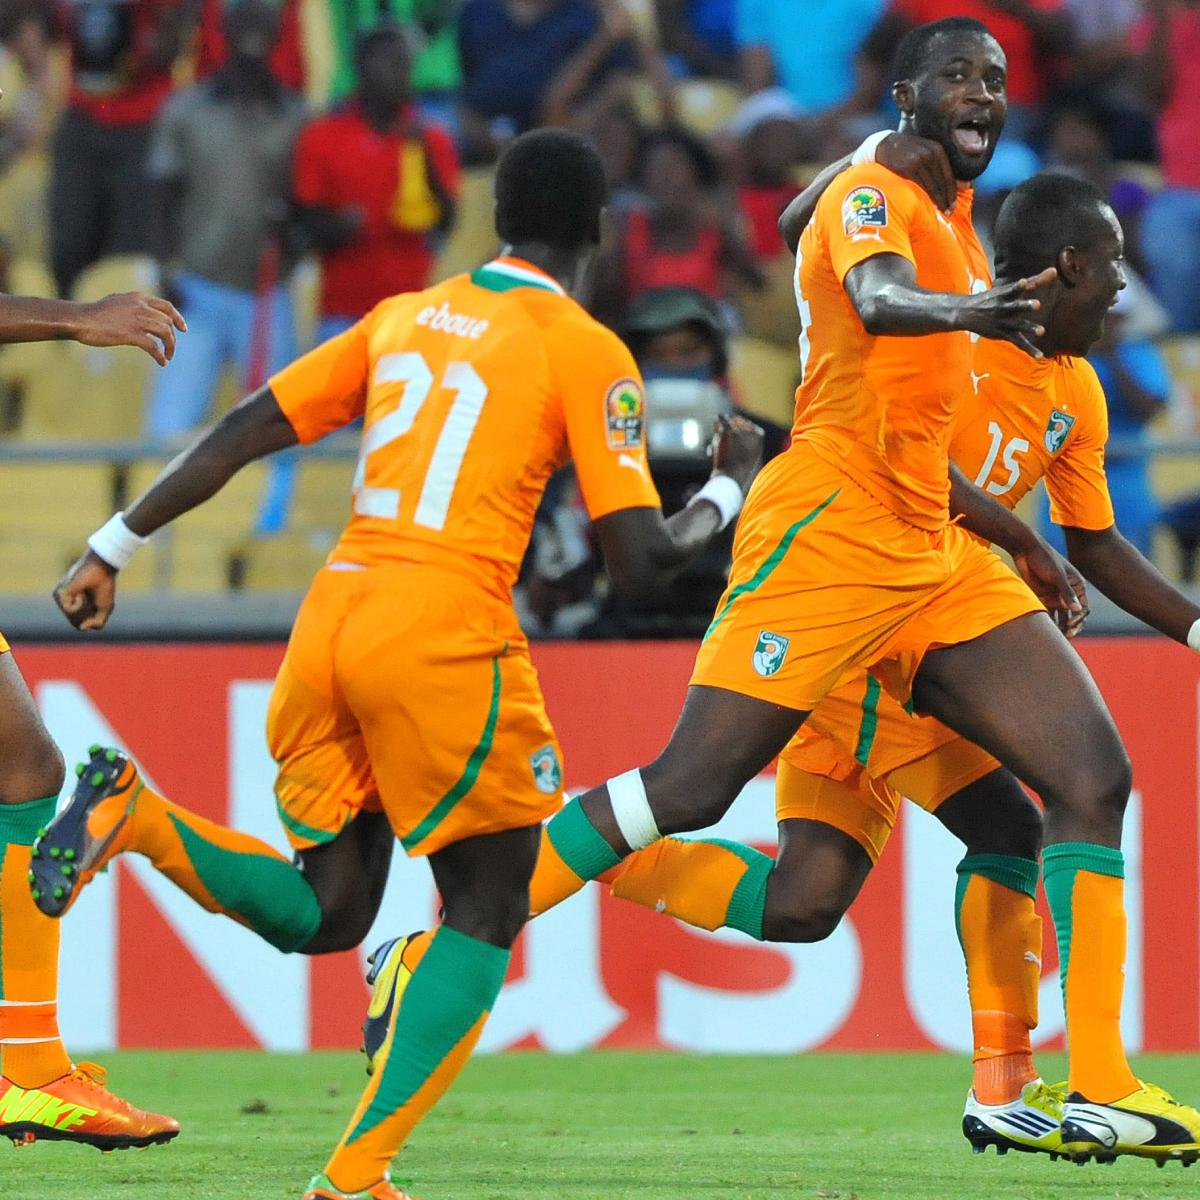 Africa Cup of Nations 2013: Predicting Winners of Wednesday's Group D